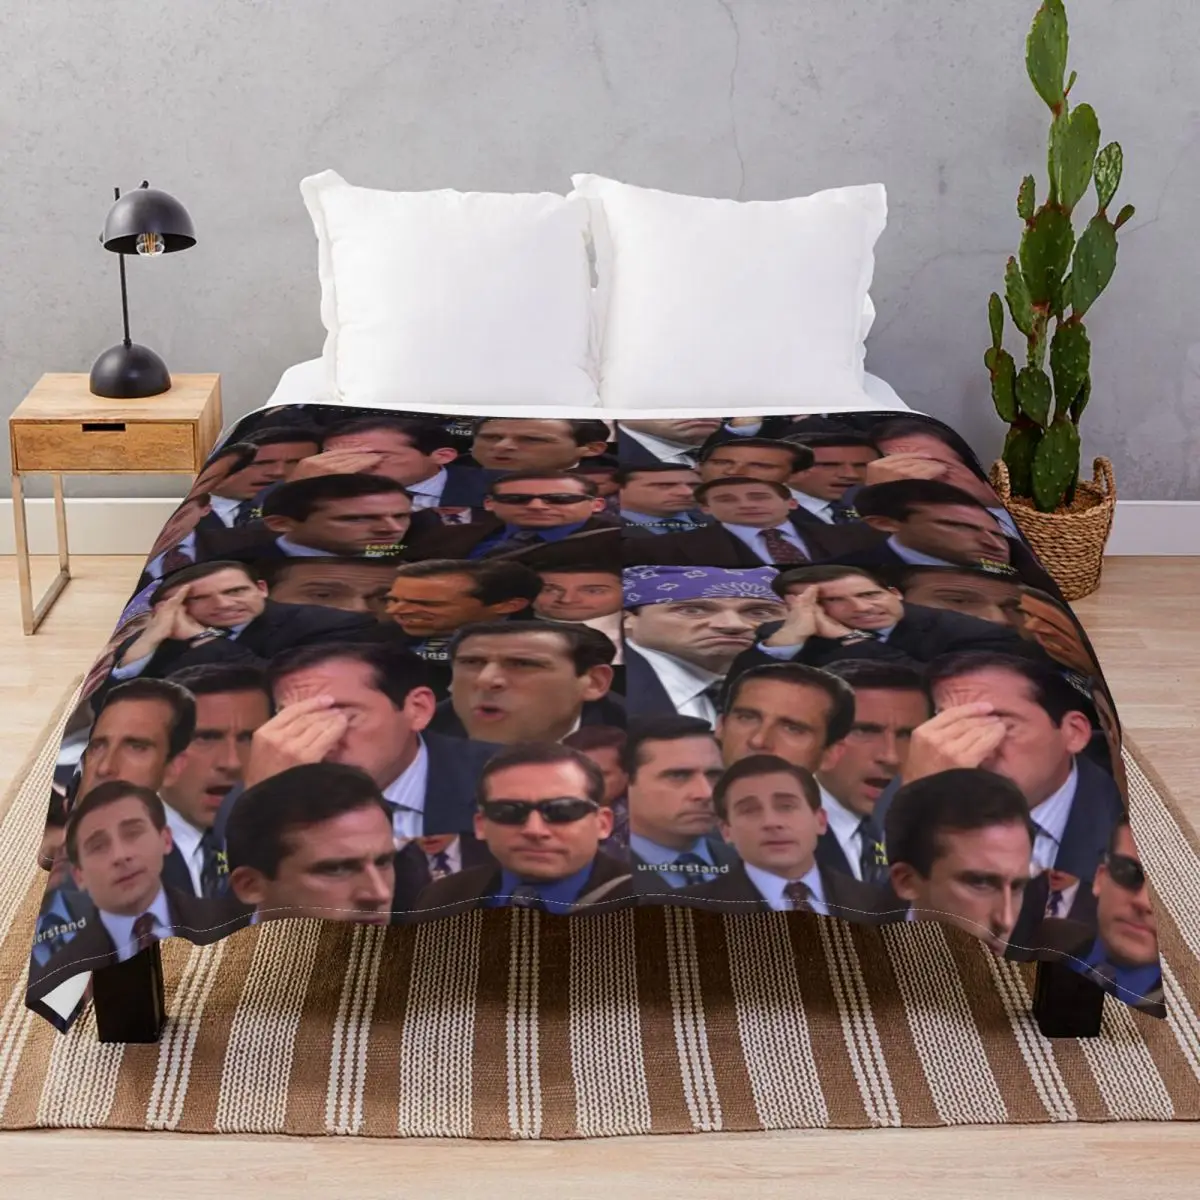 The Office Set Blanket Flannel Decoration Soft Throw Blankets for Bedding Home Couch Camp Office